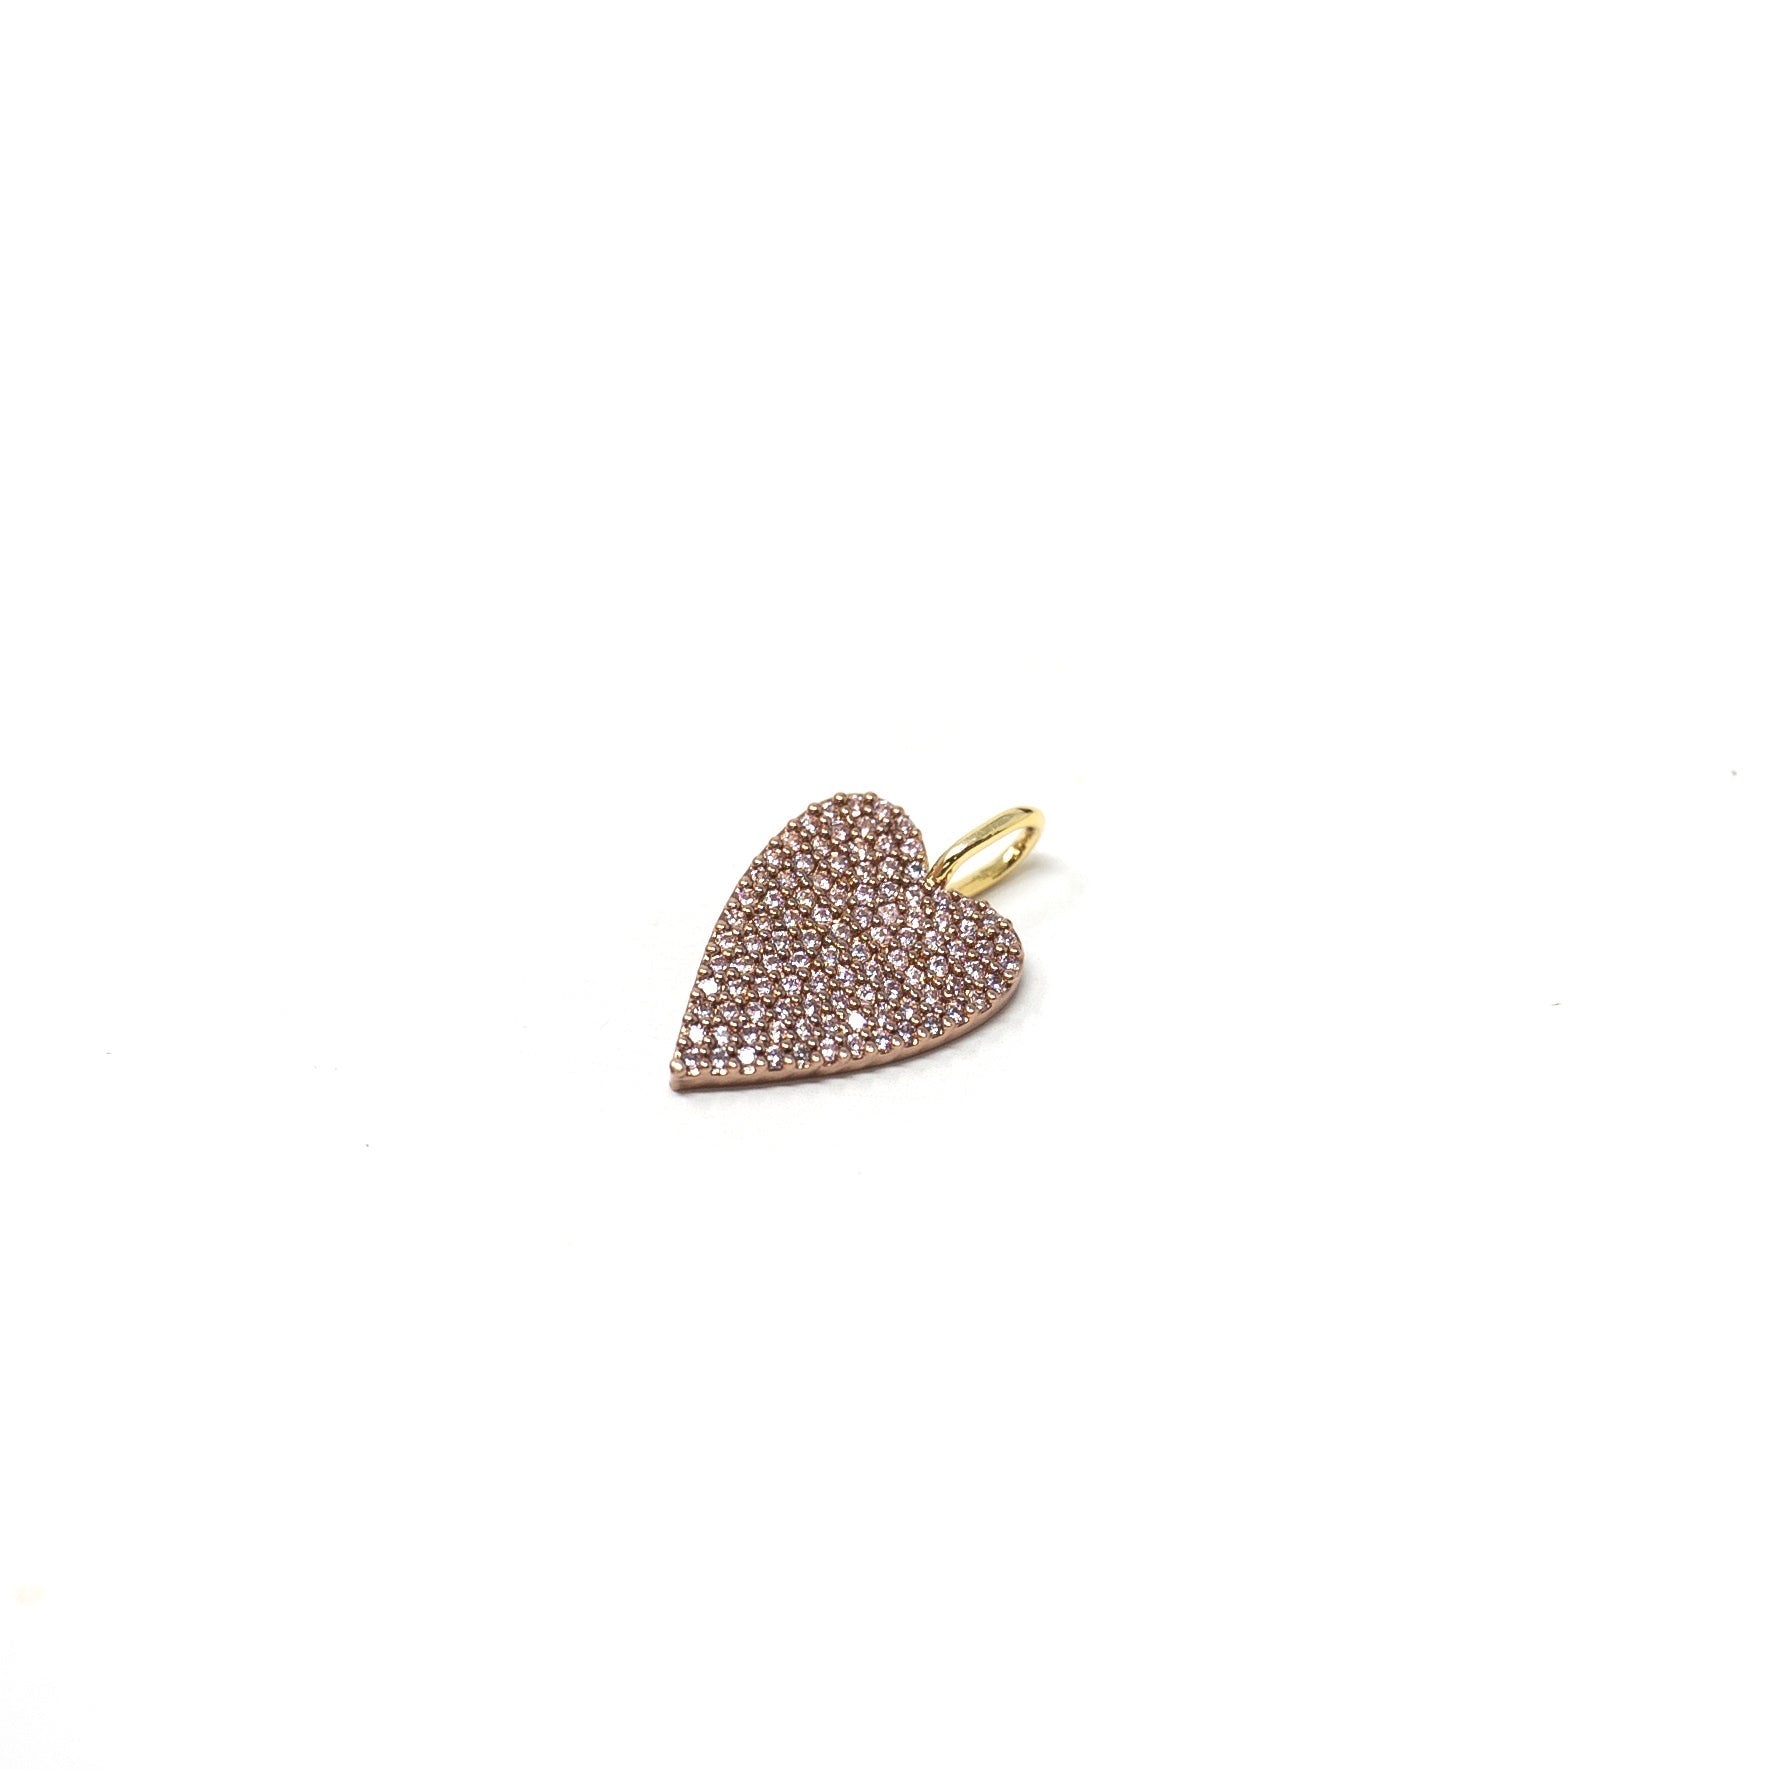 Moody Heart Charm Charms & Pendants The Sis Kiss Gold with Pink Crystals